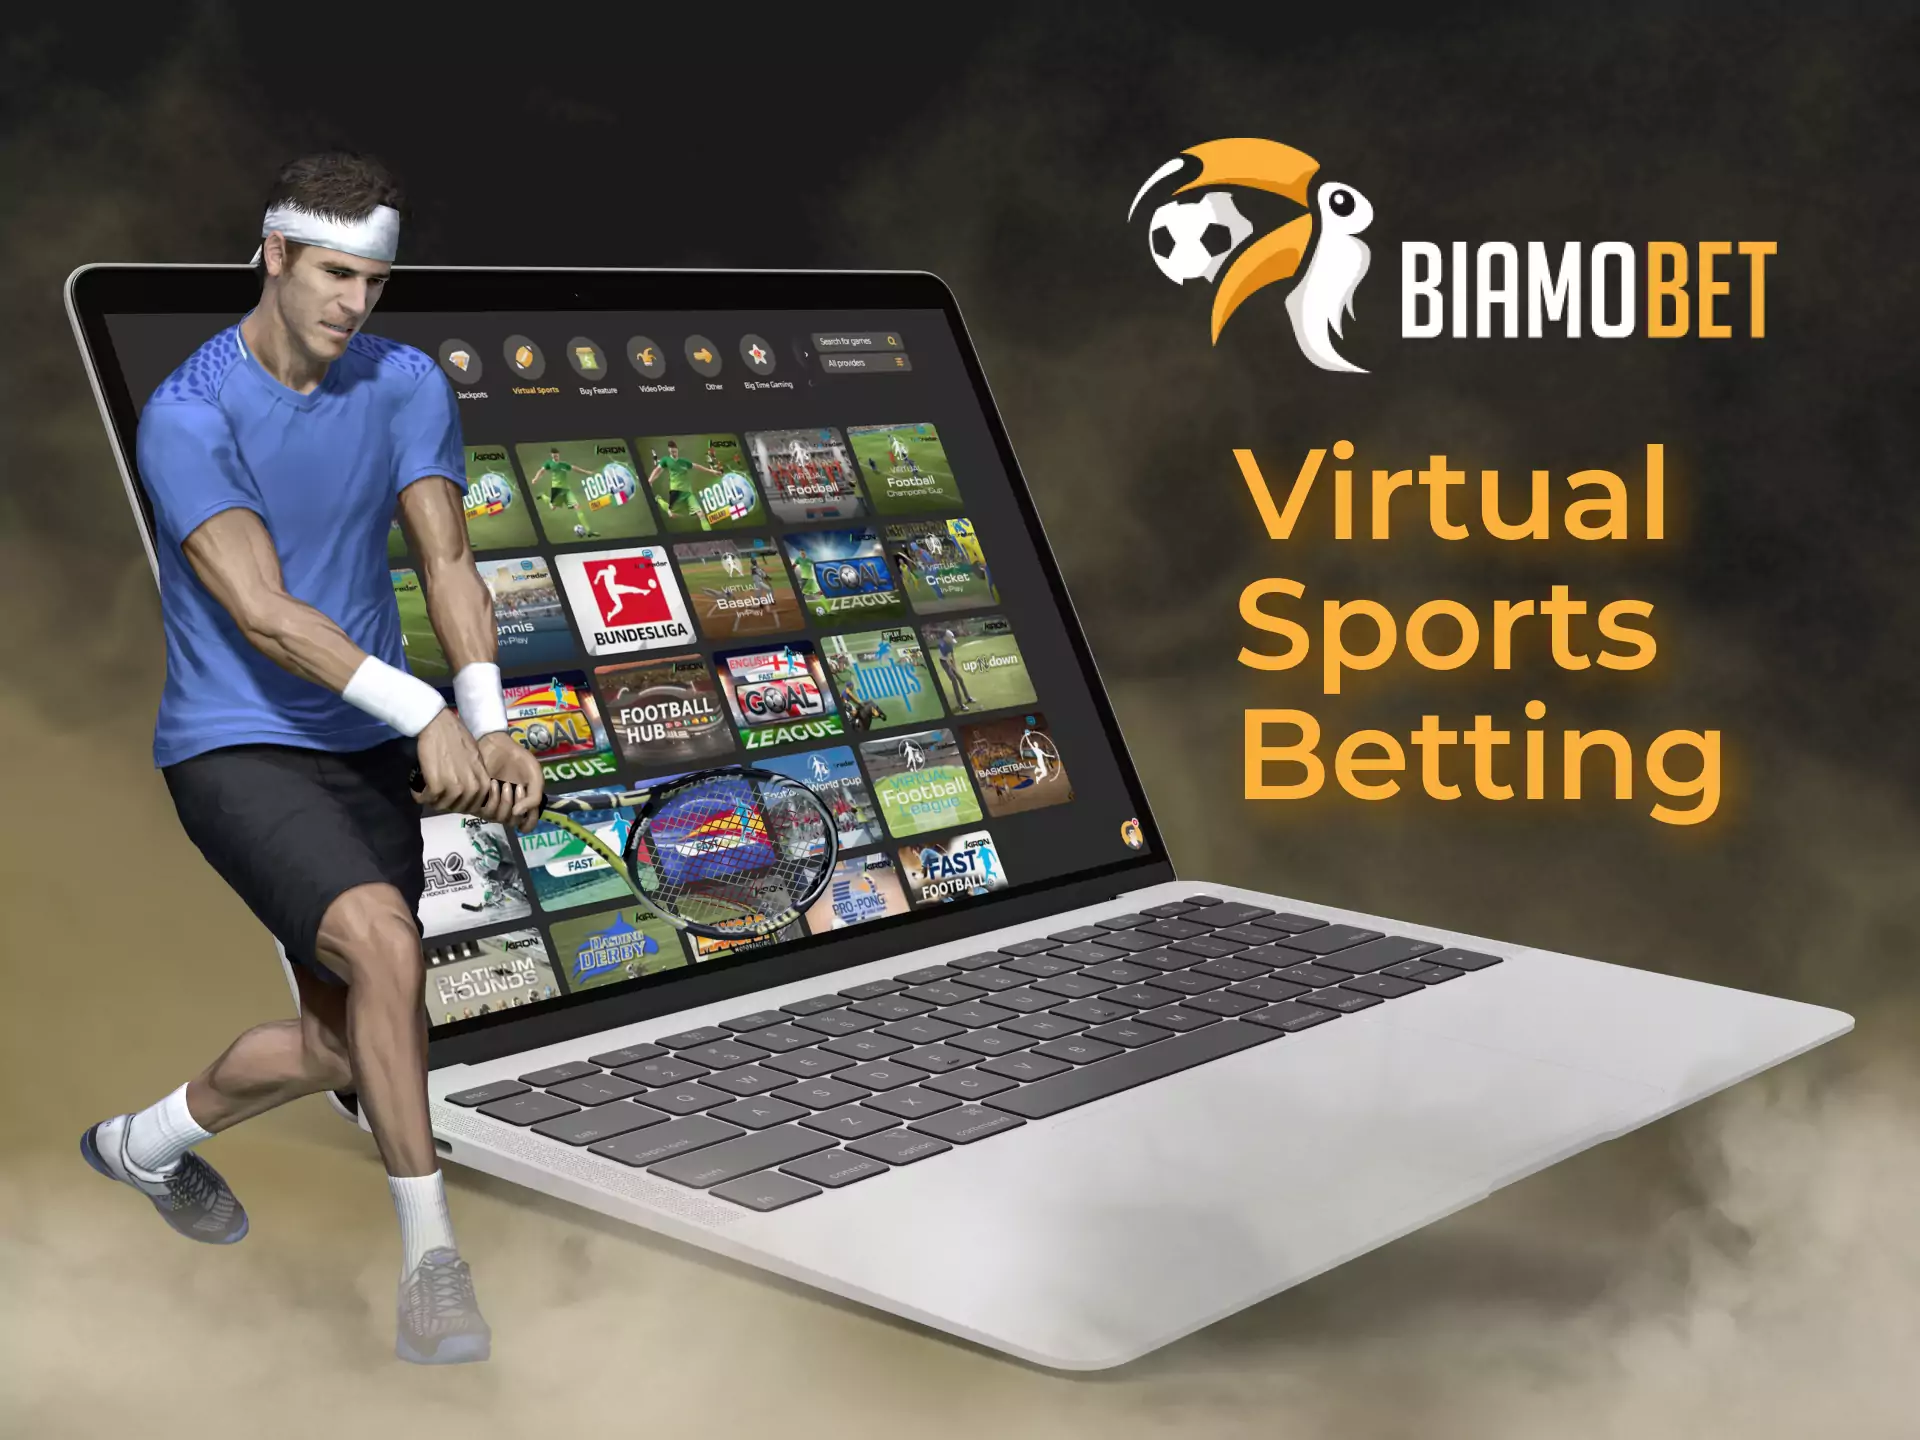 Virtual sports betting is available for users on the Biamobet site.